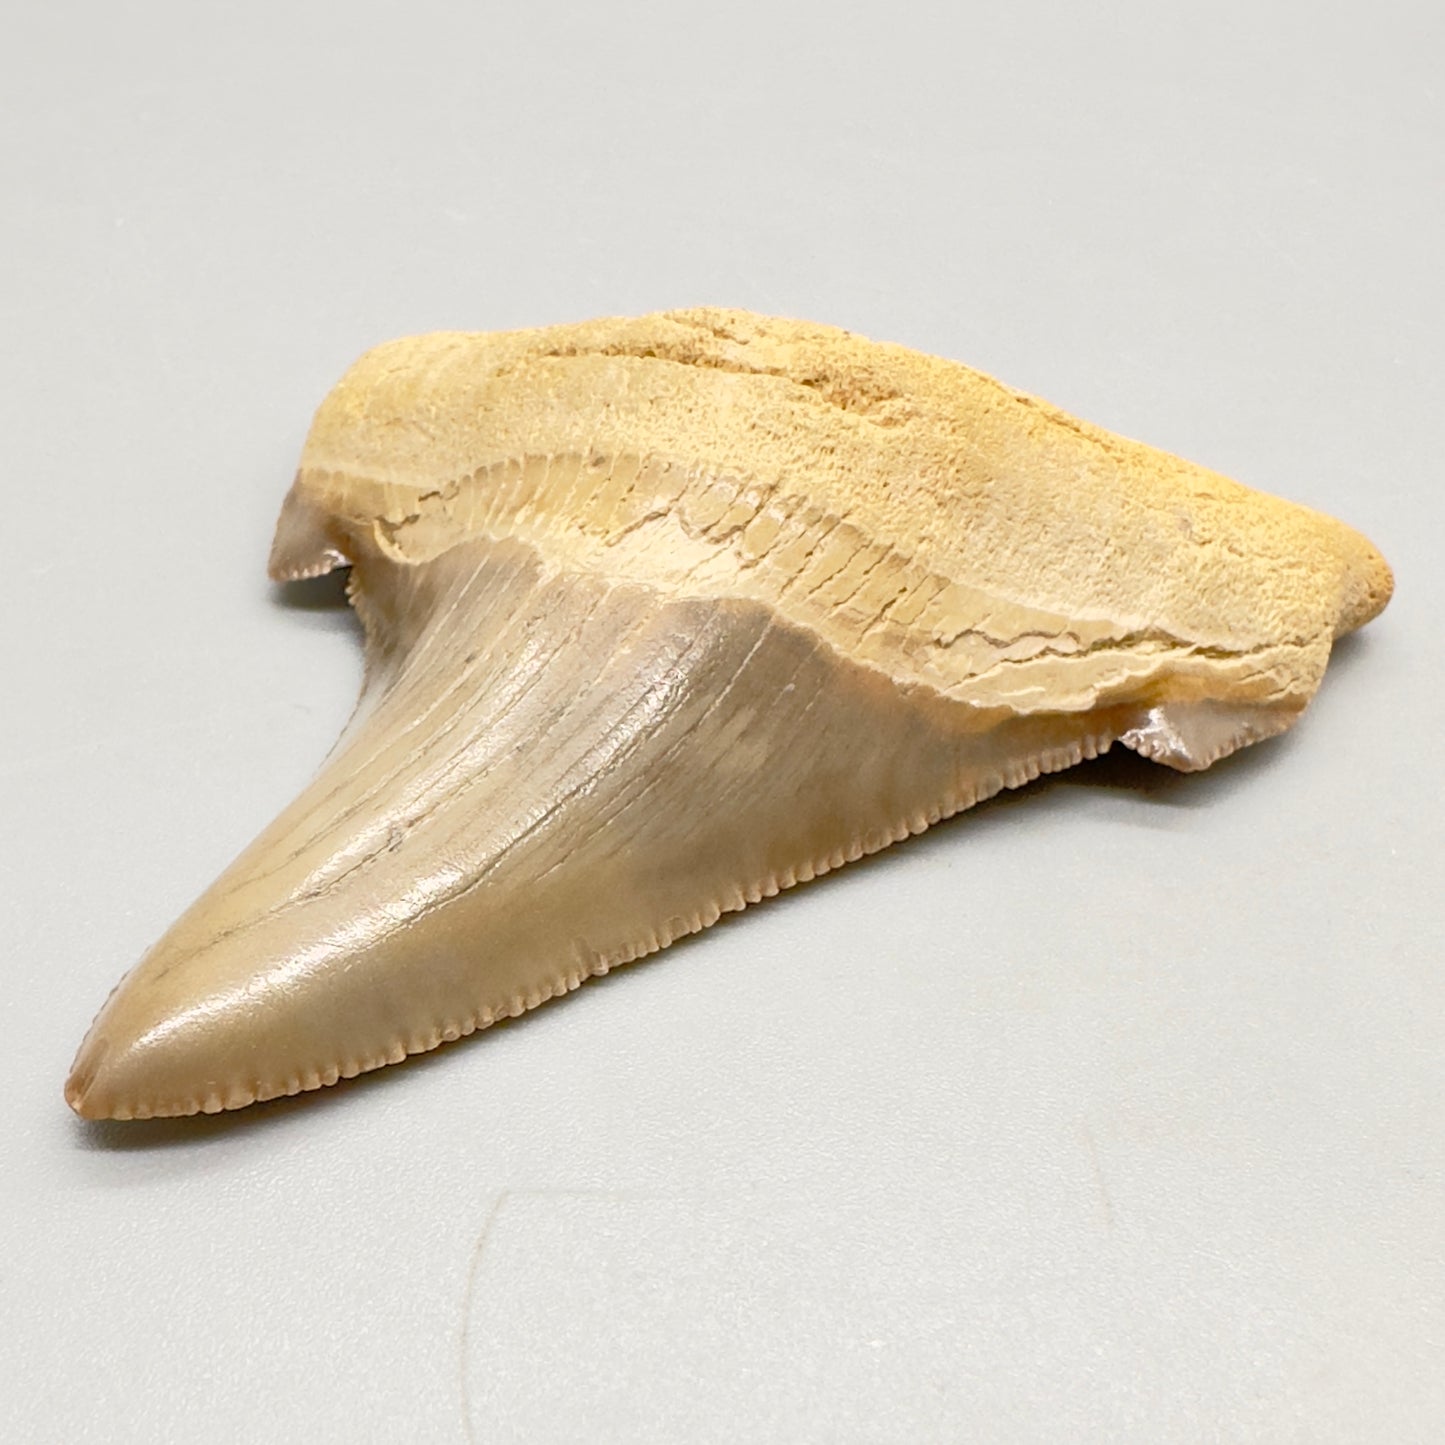 2.98 large, colorful, serrated Carcharocles angustidens shark tooth from Summerville, South Carolina AN411 front right